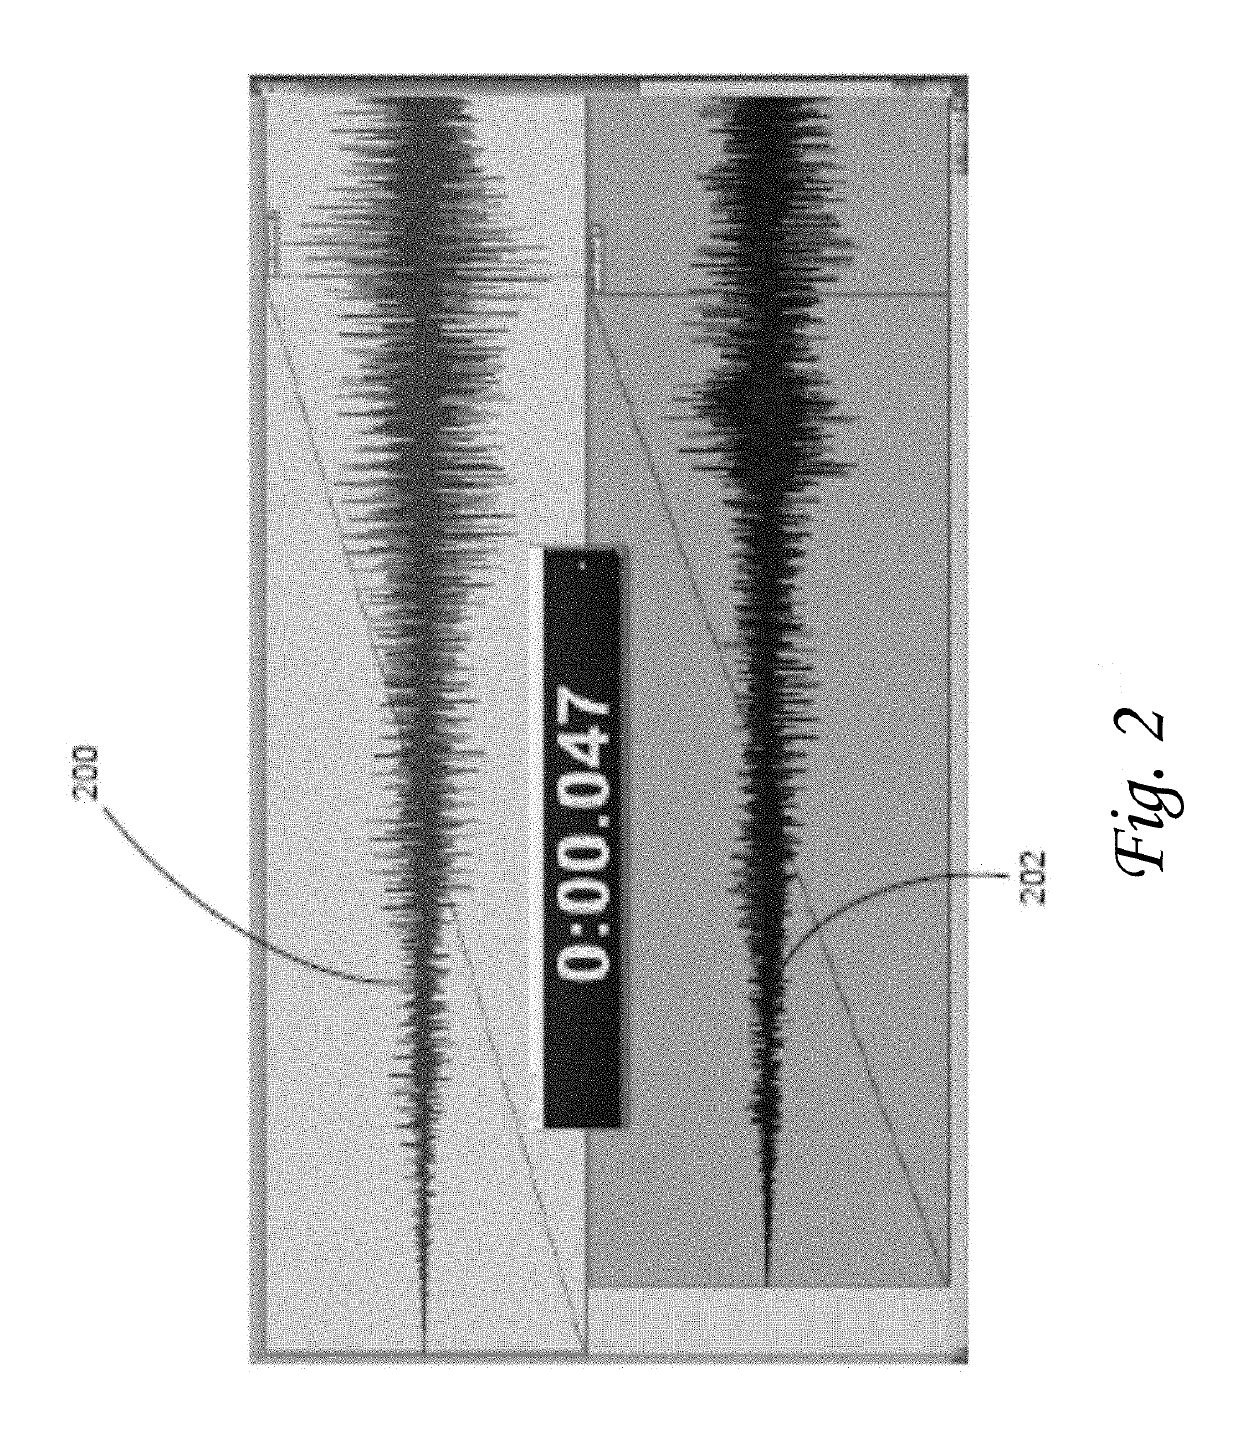 Enhancing audio content for voice isolation and biometric identification by adjusting high frequency attack and release times